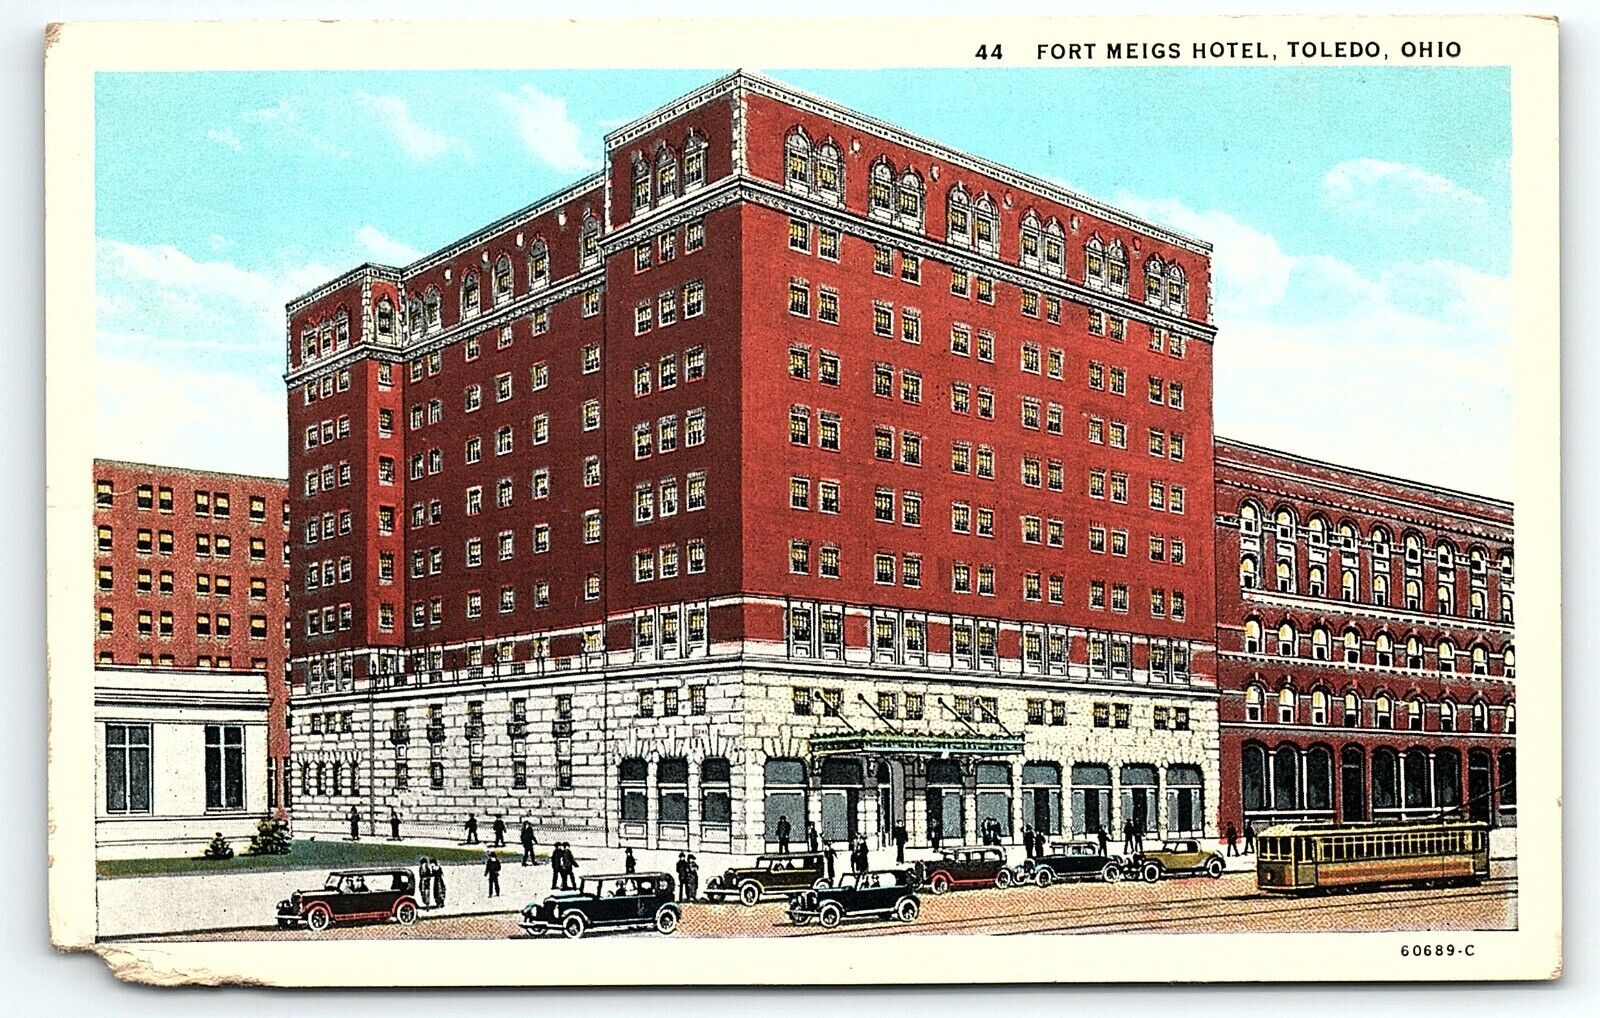 1930s TOLEDO OHIO FORT MEIGS HOTEL TROLLEY AUTOMIBLES STREET VIEW POSTCARD P2063